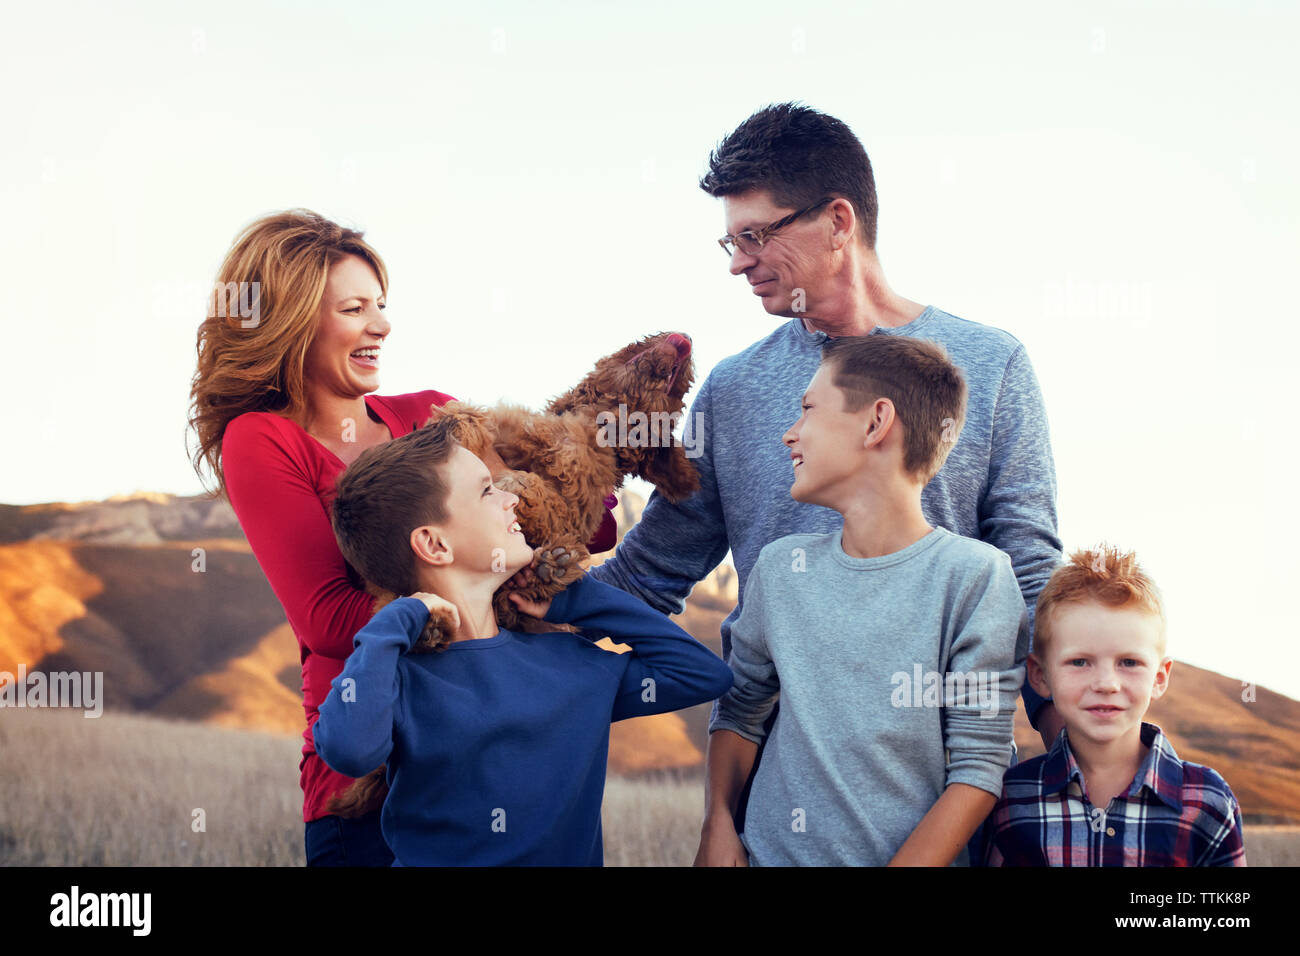 Happy family with dog standing on field against clear sky Stock Photo